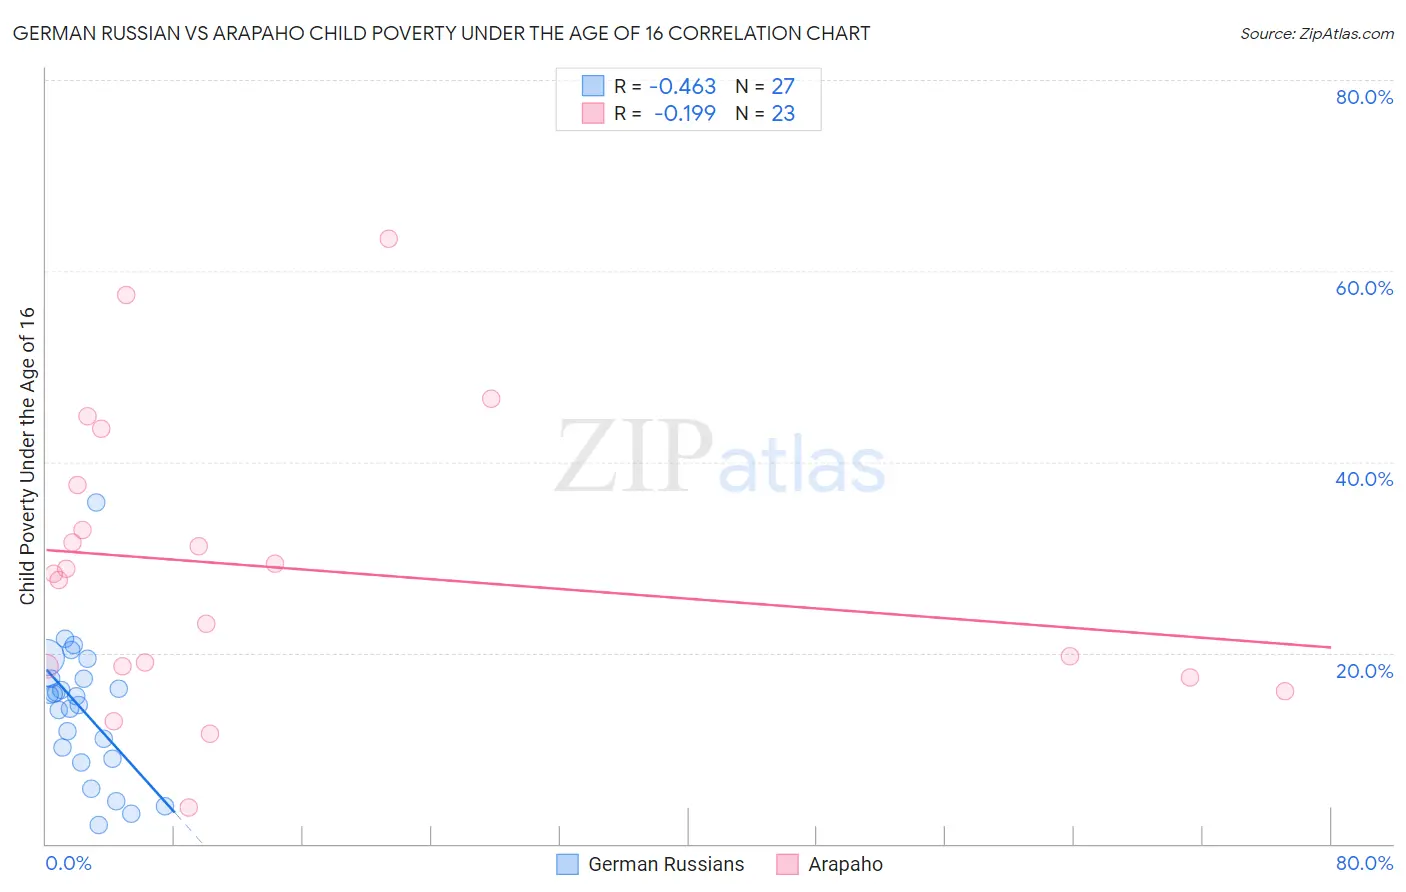 German Russian vs Arapaho Child Poverty Under the Age of 16